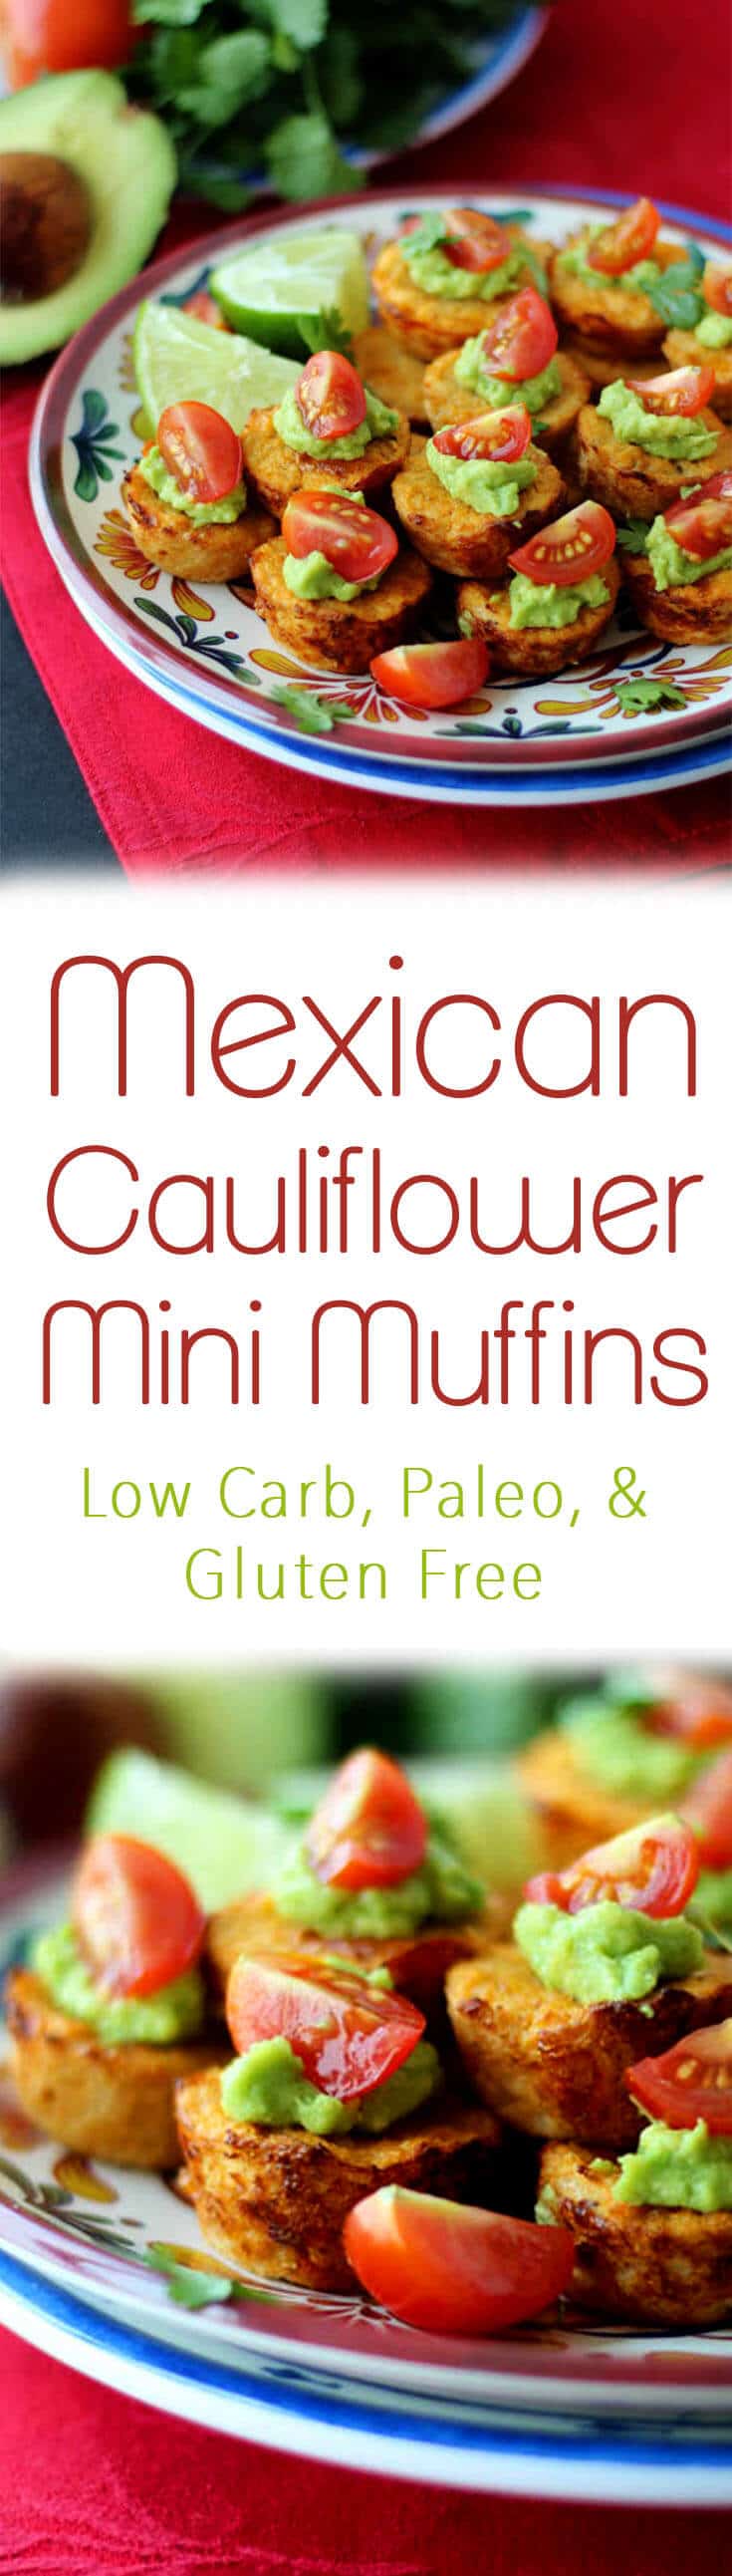 A pinterest image of plate of mini muffins with the text overlay \"Mexican Cauliflower Mini Muffins Low Carb, Paleo, & Gluten Free.\"